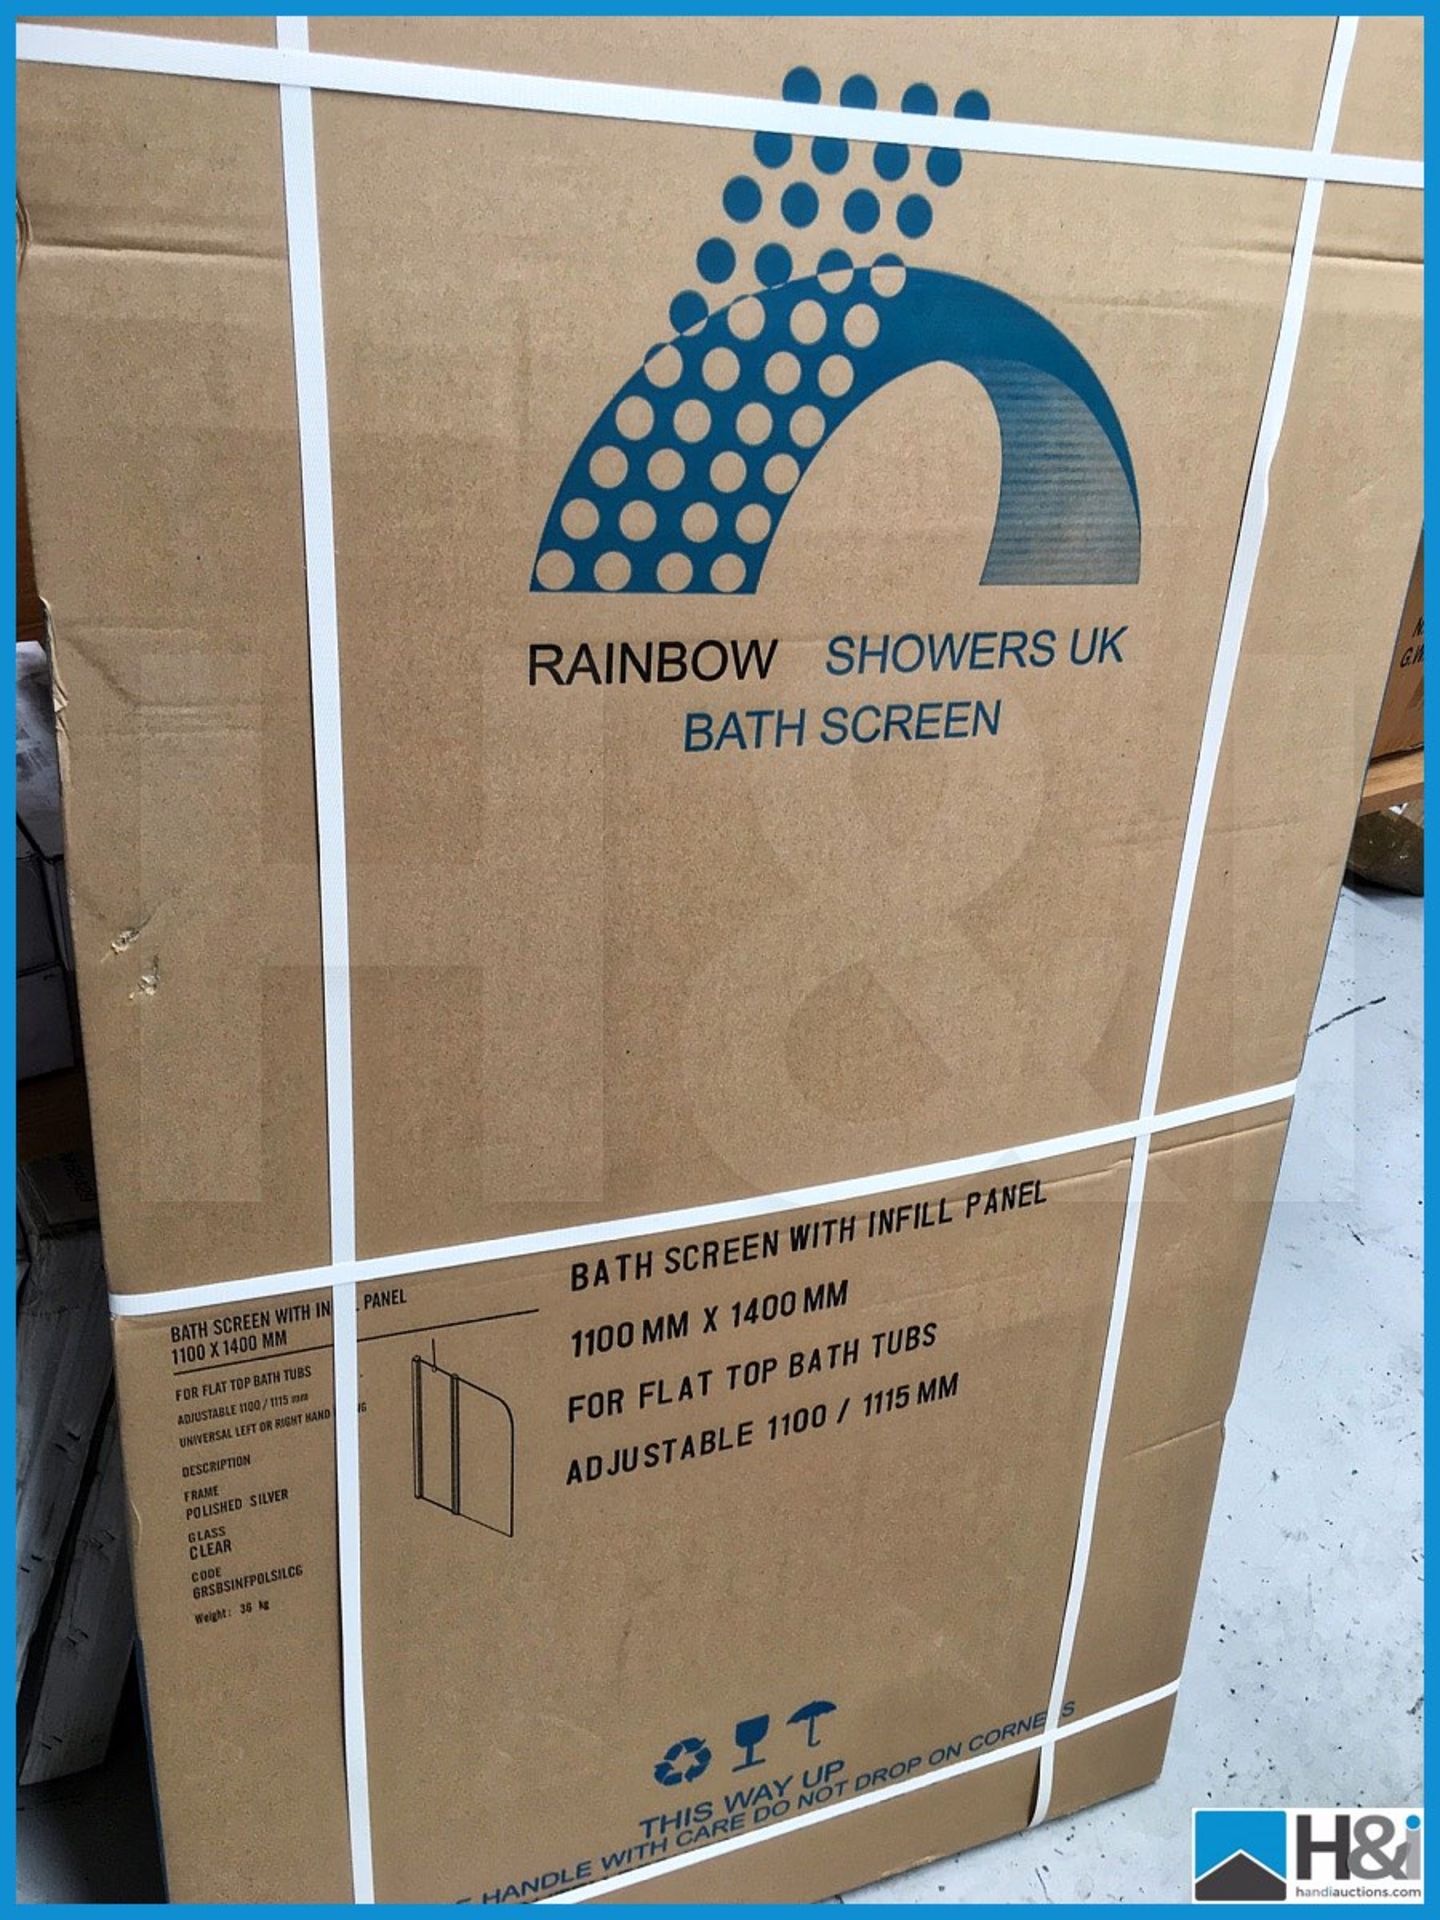 Designer Rainbow bath screen with infill panel 1100x1400. New and boxed. Suggested manufacturers